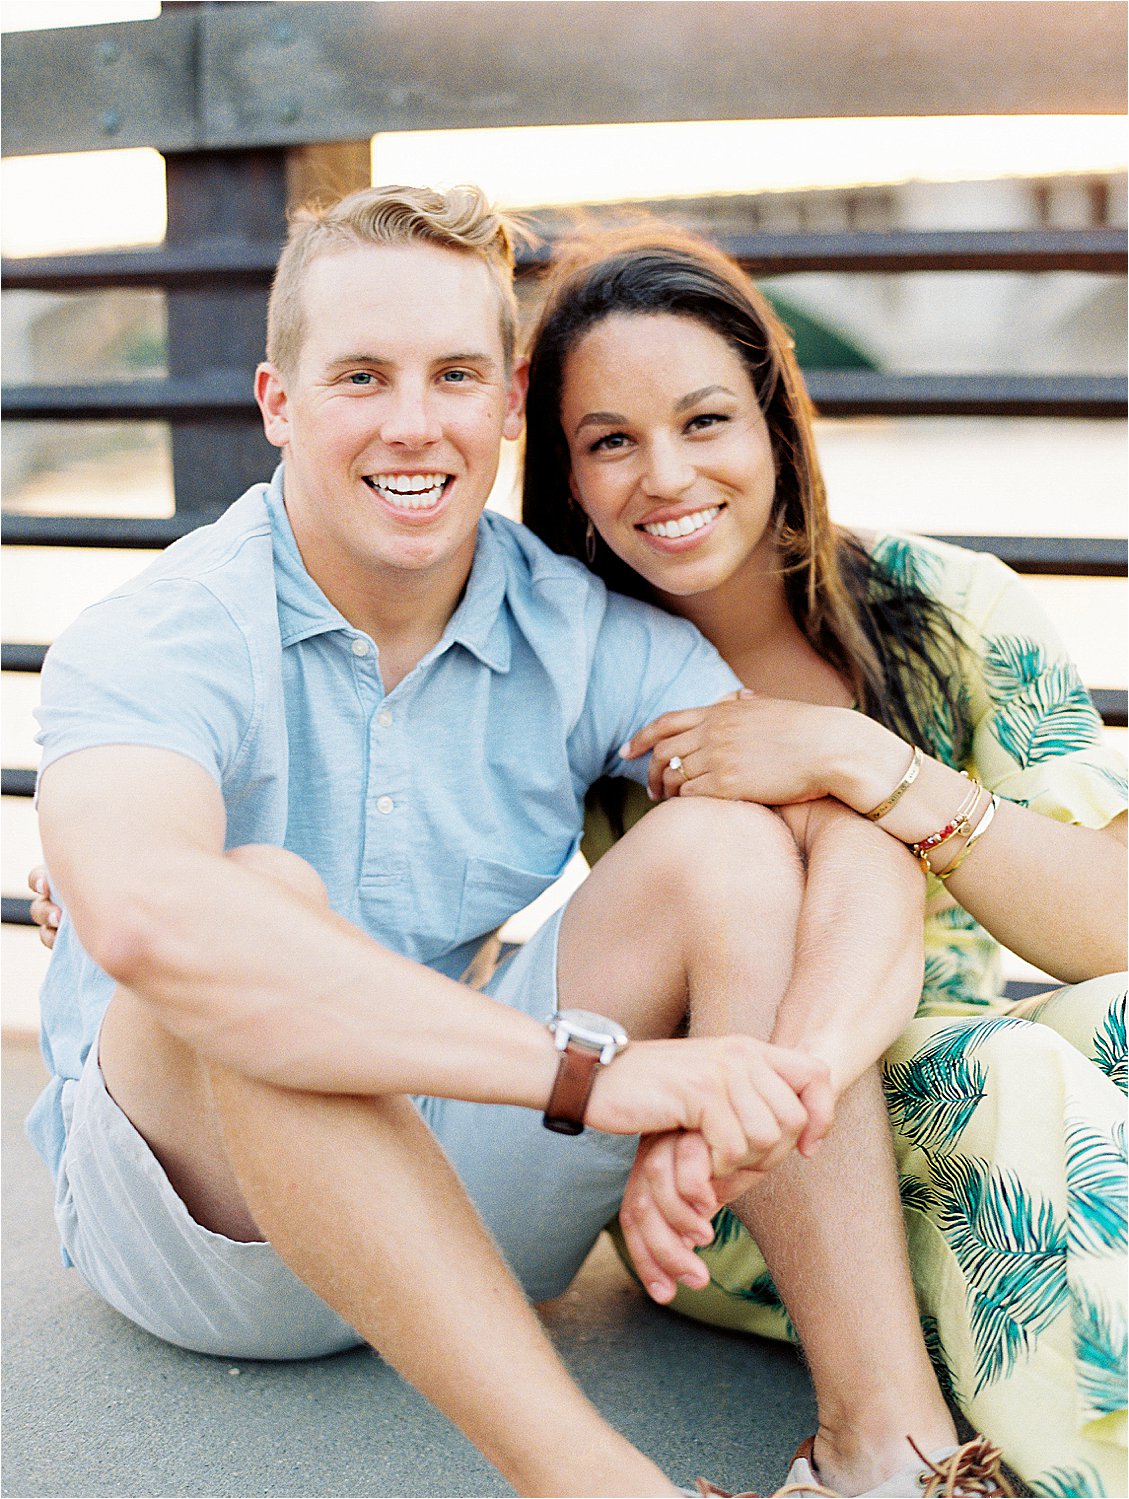 Tropical Downtown Minneapolis Engagement Session with Minneapolis + Destination Film Wedding Photographer, Renee Hollingshead